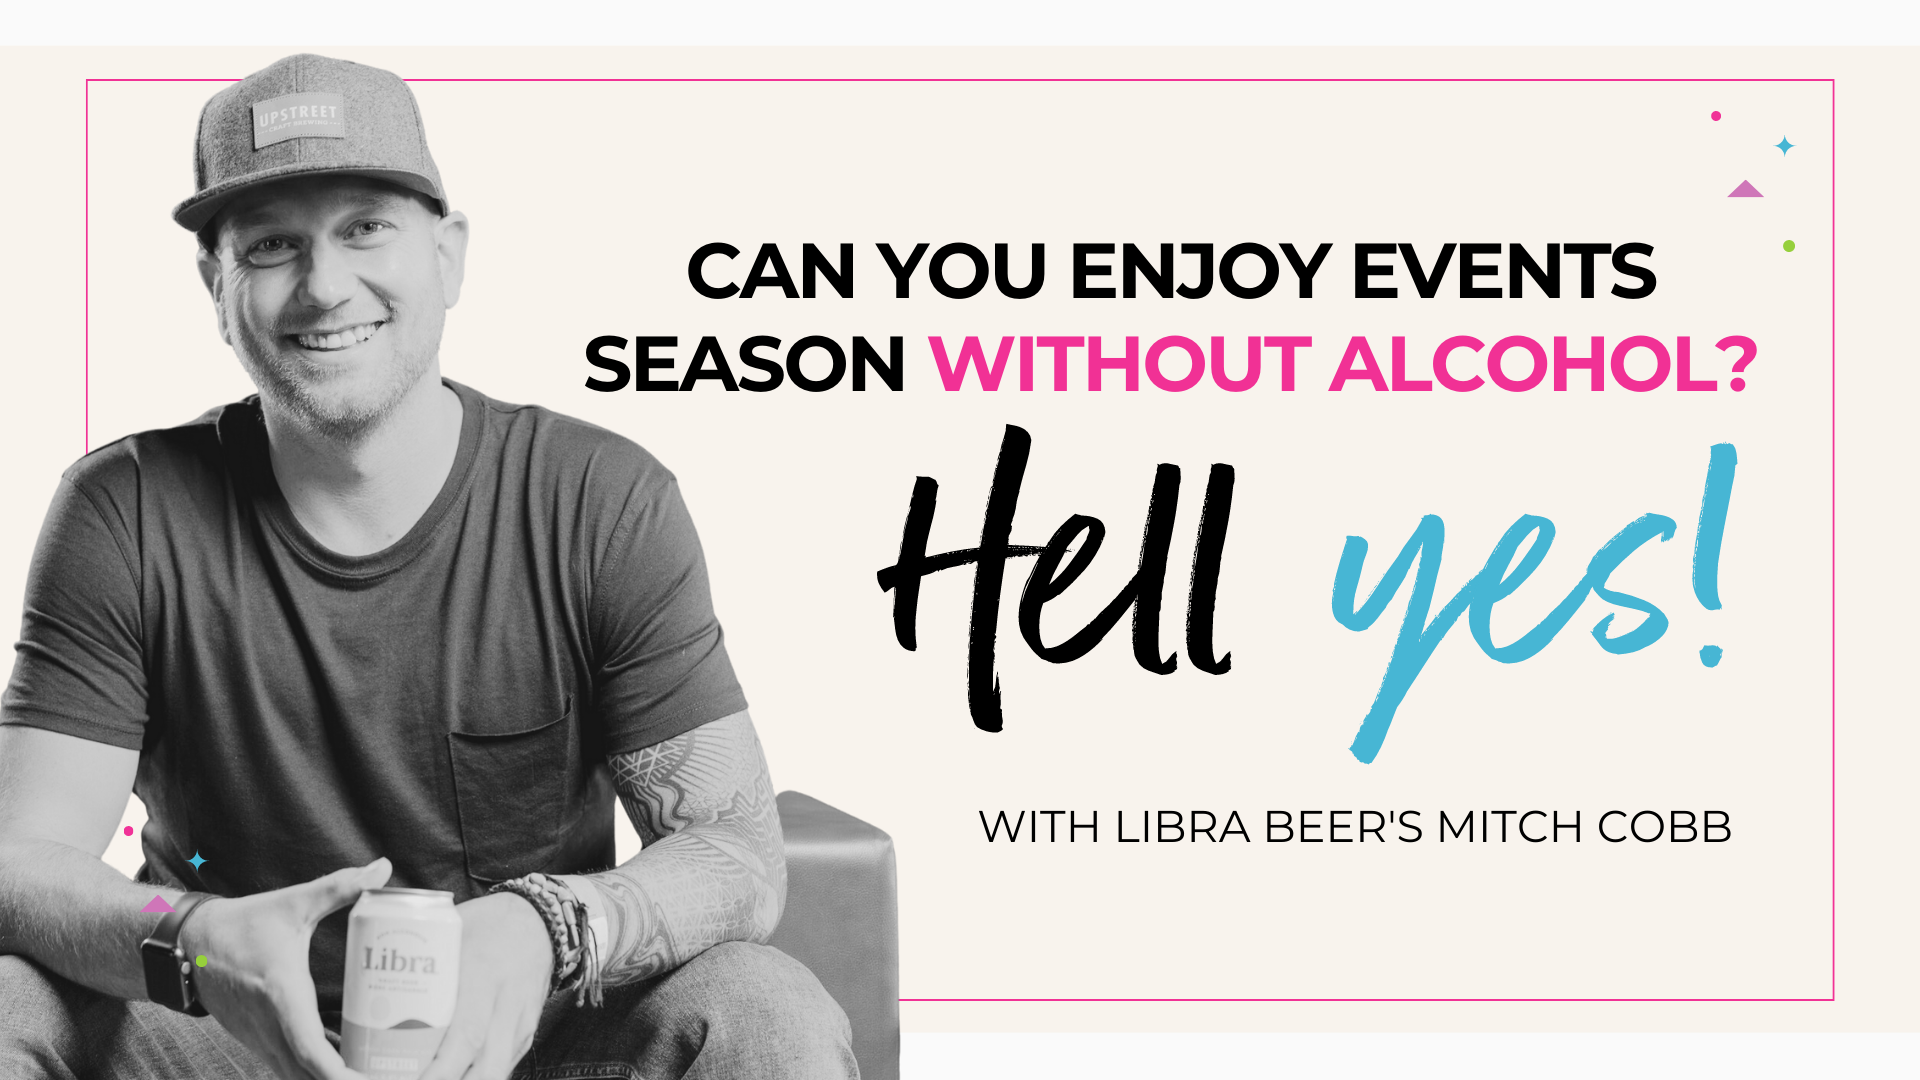 Libra Beer and Upstreet Brewing's Mitch Cobb talks enjoying events without alcohol